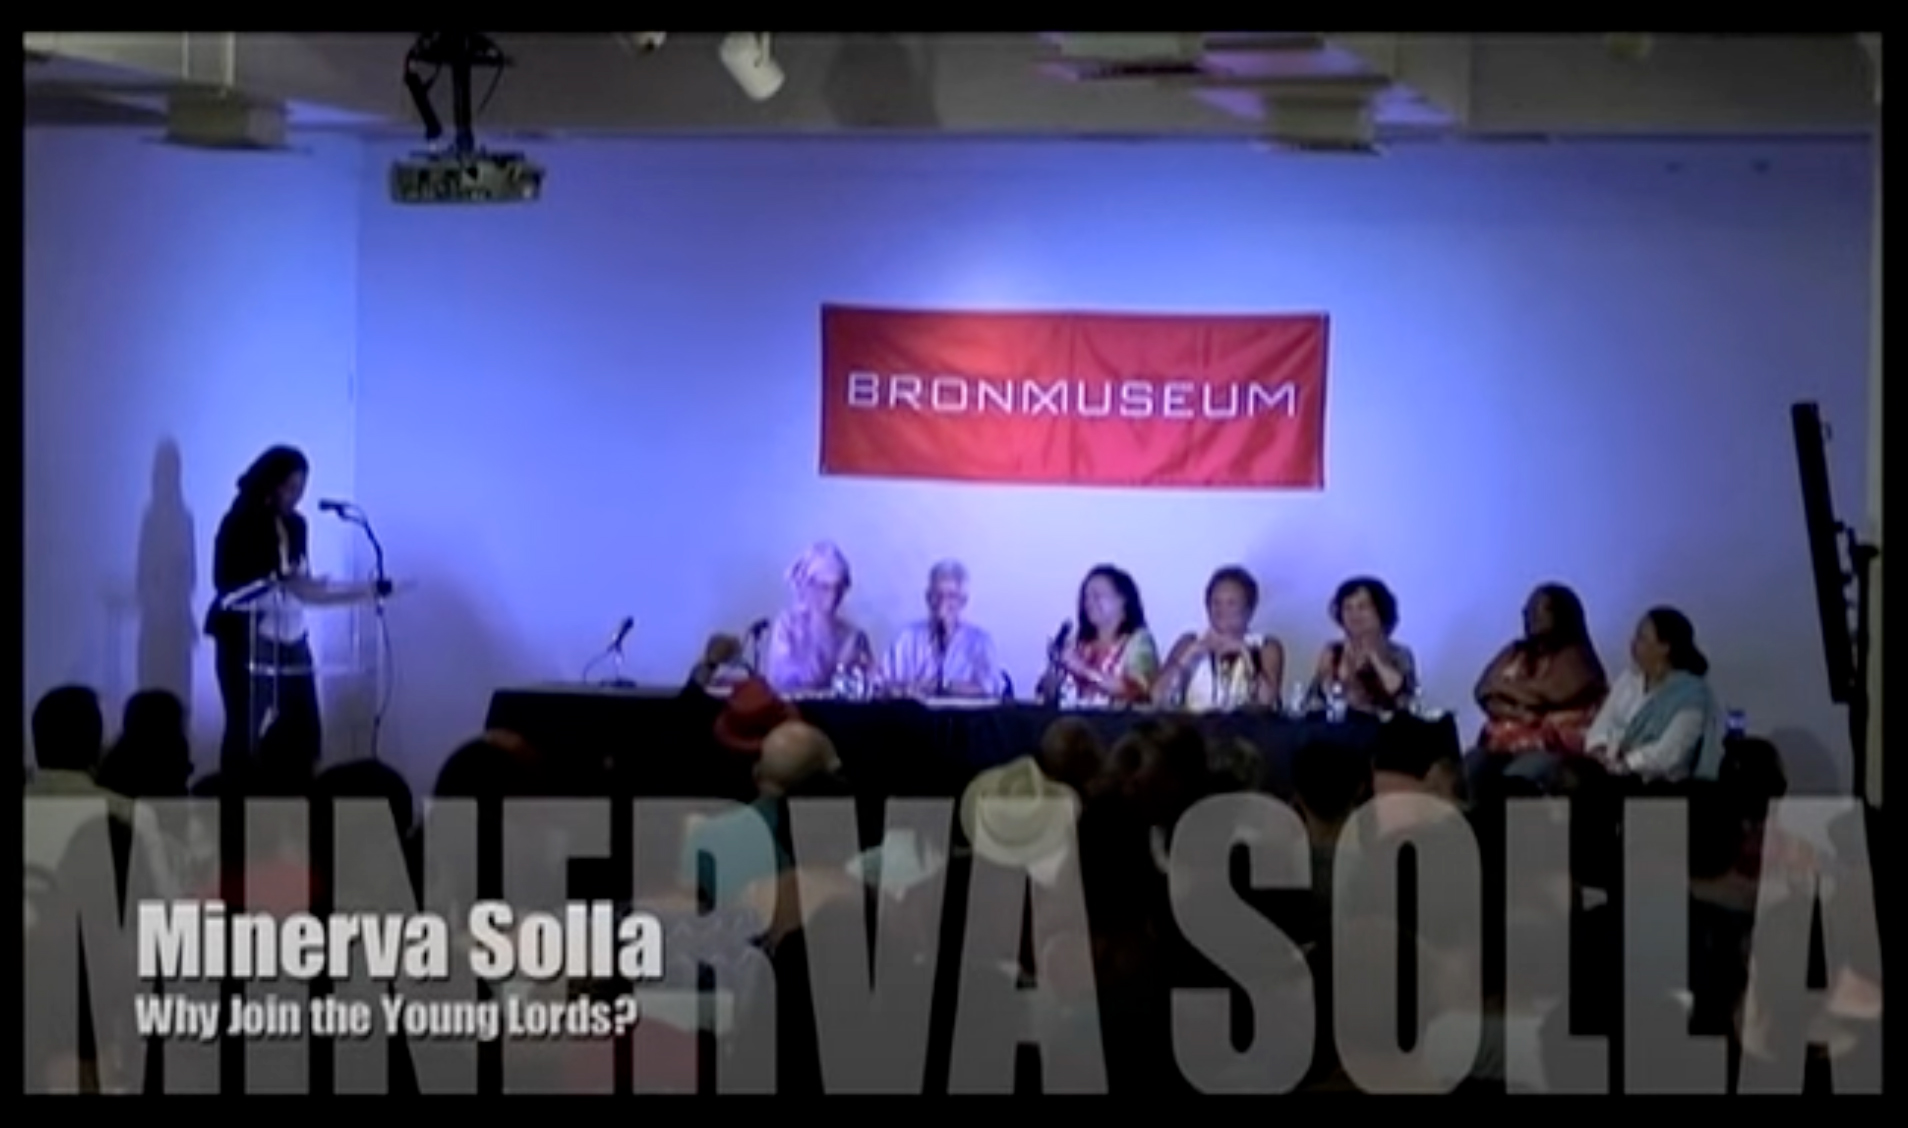 Still image from a videotaped event at the Bronx Museum showing a panel of women from the Young Lords sitting at a table and a speaker at a podium